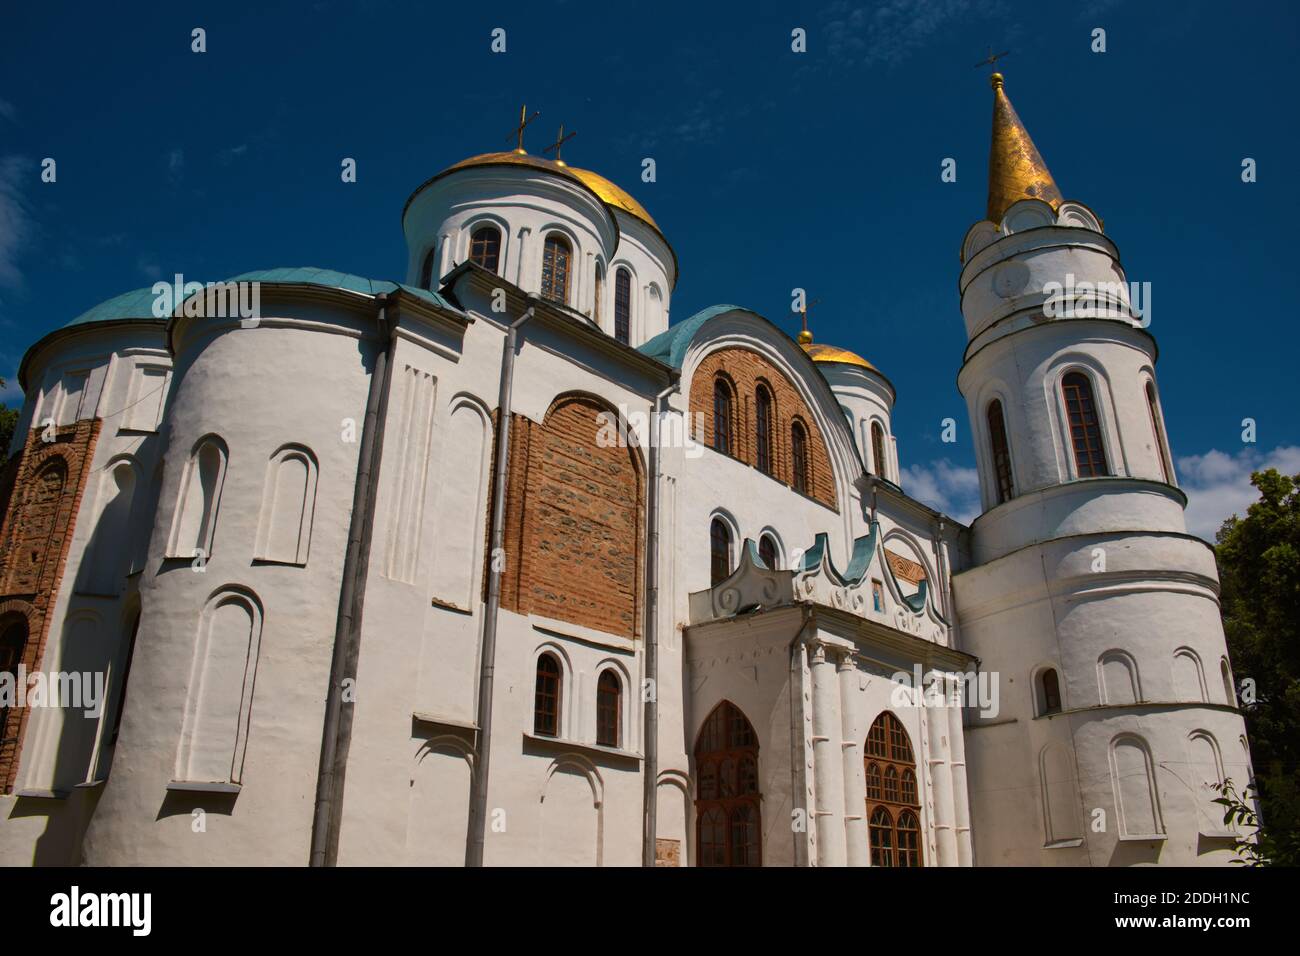 Transfiguration Cathedral in Chernihiv. One of the oldest monumental buildings in Ukraine. The main building of the Chernihiv principality. Monument o Stock Photo